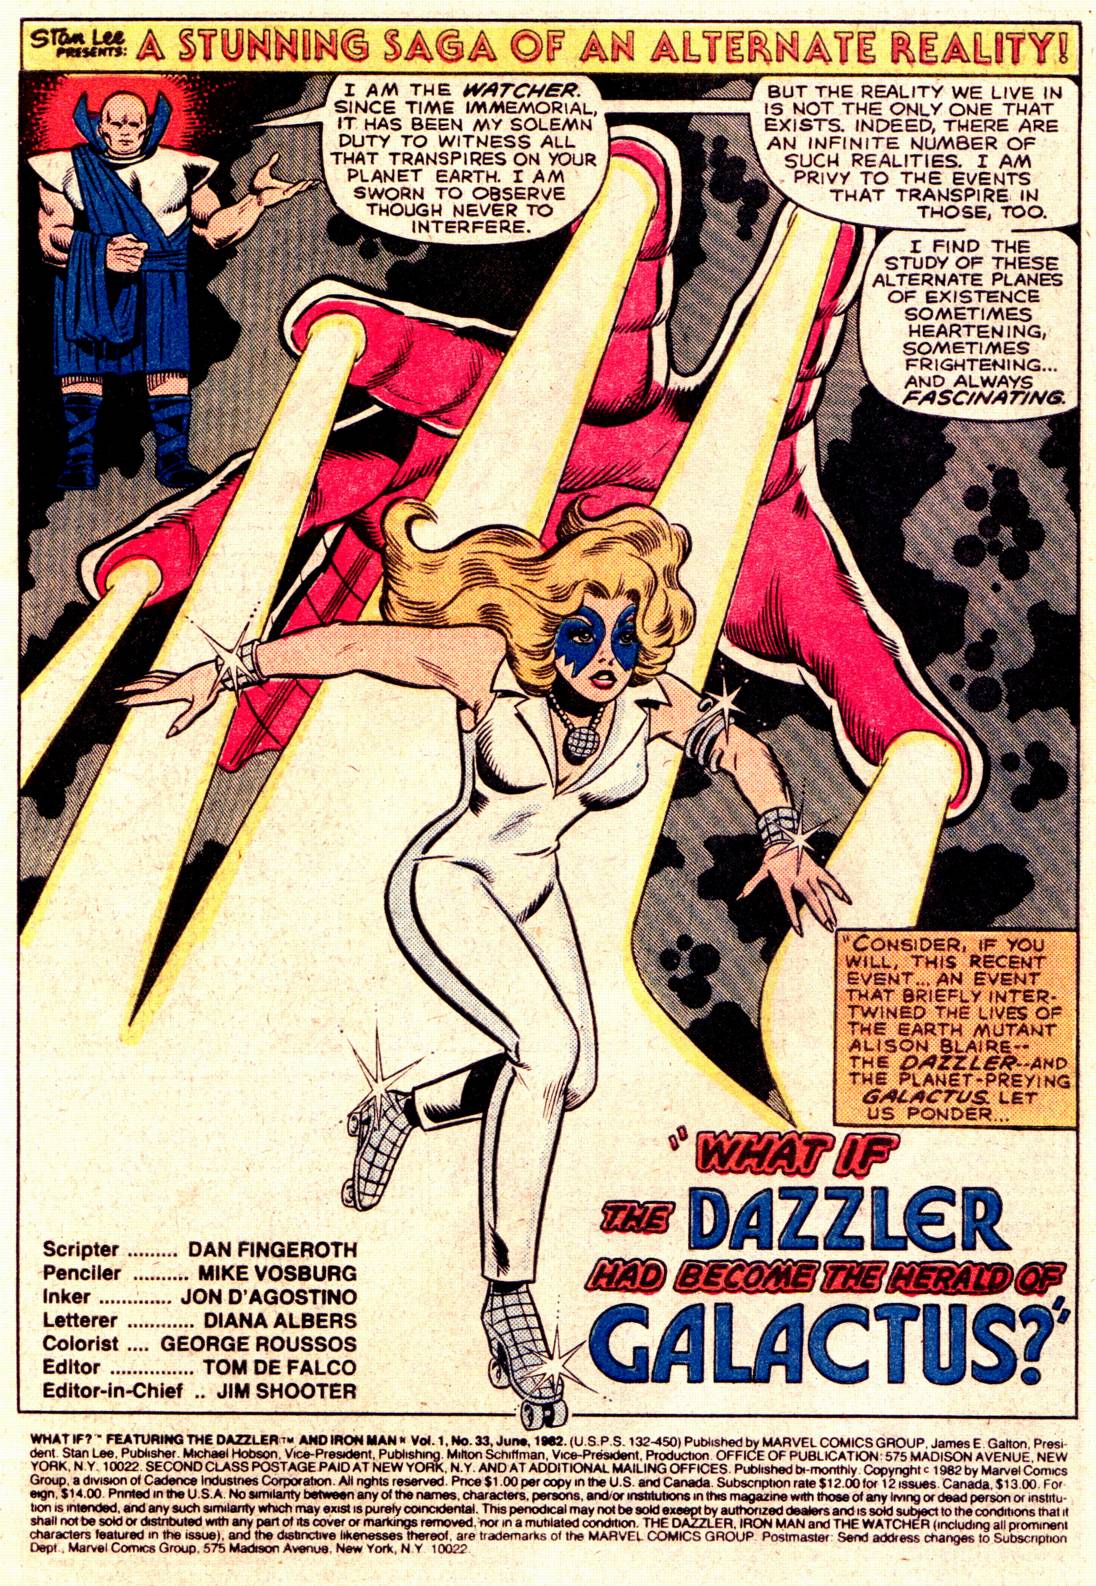 What If? (1977) issue 33 - Dazzler and Iron Man - Page 2